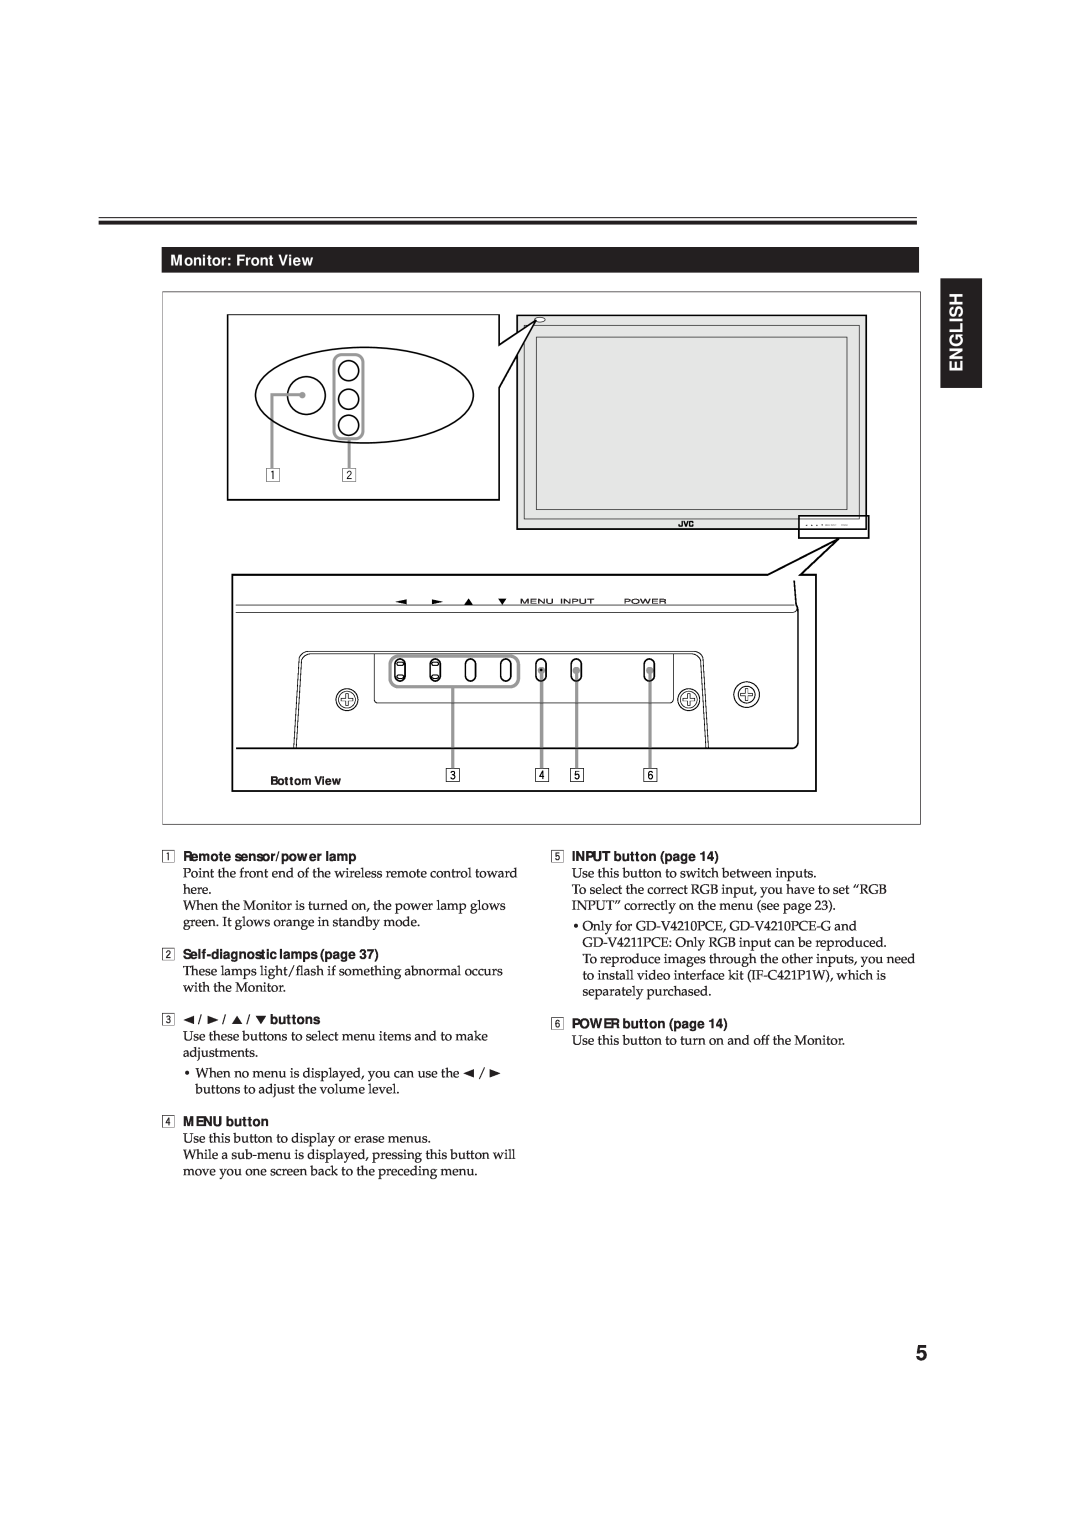 JVC GD-V4211PCE Monitor Front View, English, Remote sensor/power lamp, Self-diagnostic lamps page, 3 2 / 3 / 5 / ∞ buttons 